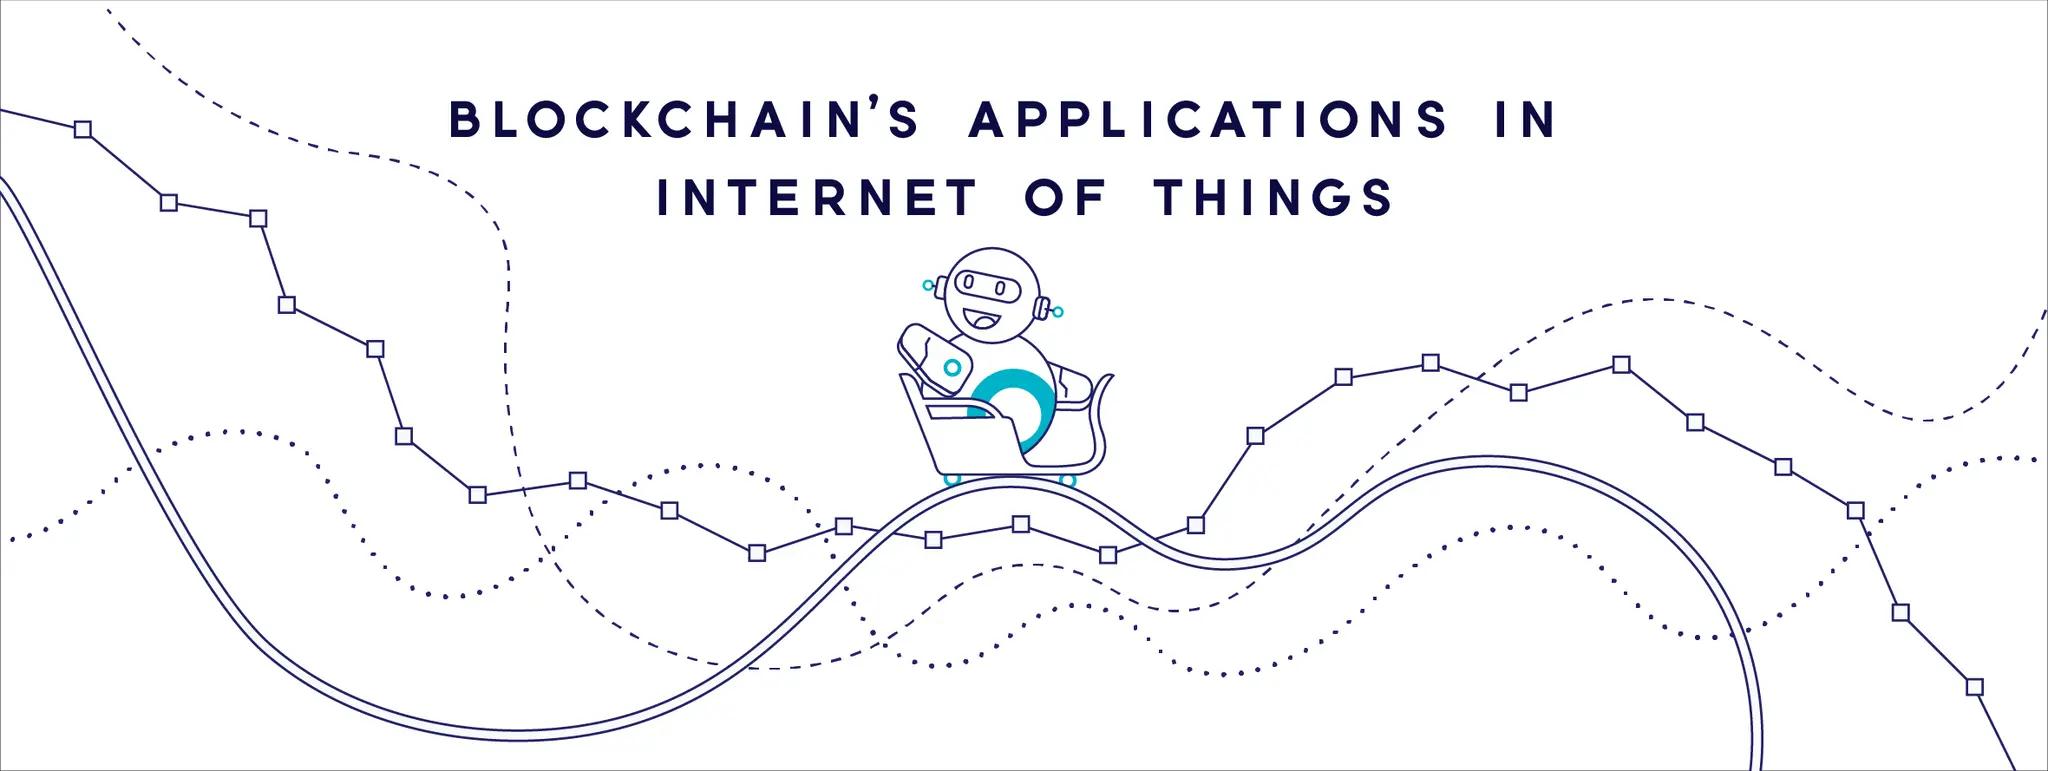 Blockchain of Things: Blockchain’s Use-Cases in Internet of Things (IoT)